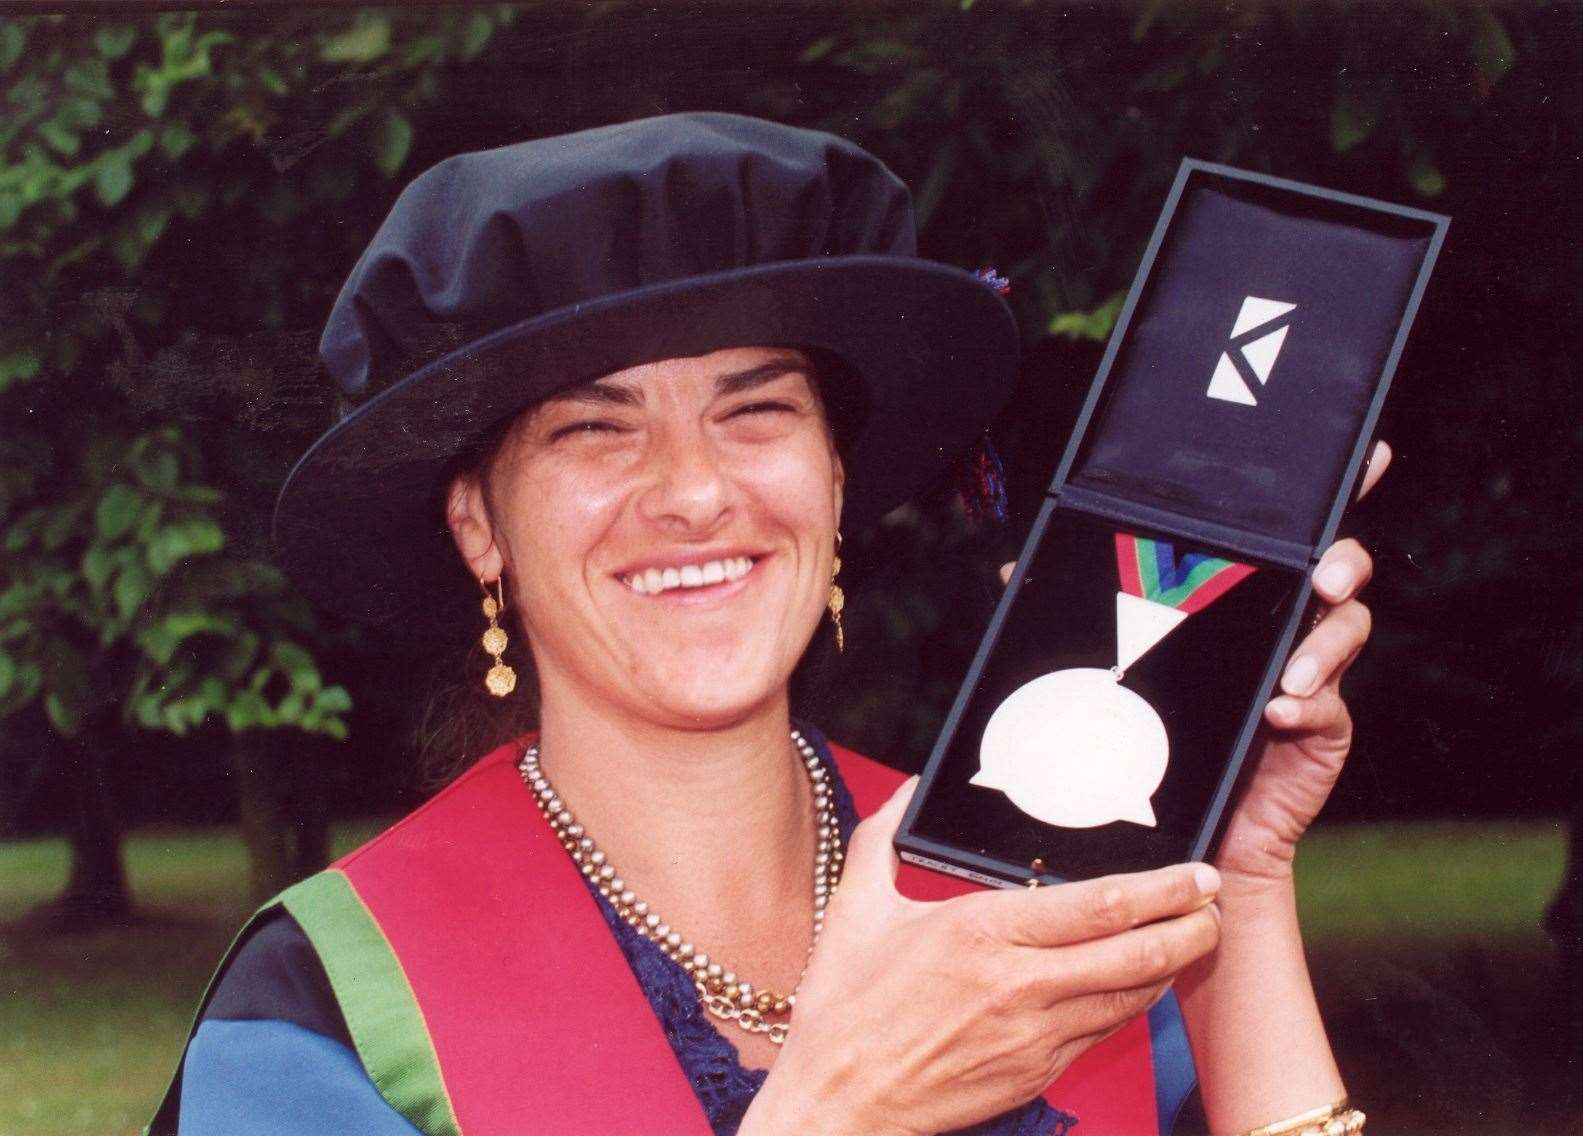 Artist Tracy Emin receives an honorary fellowship from the Kent Institute of Art and Design, Oakwood Park, Maidstone, in 2002. Image: Barry Duffield